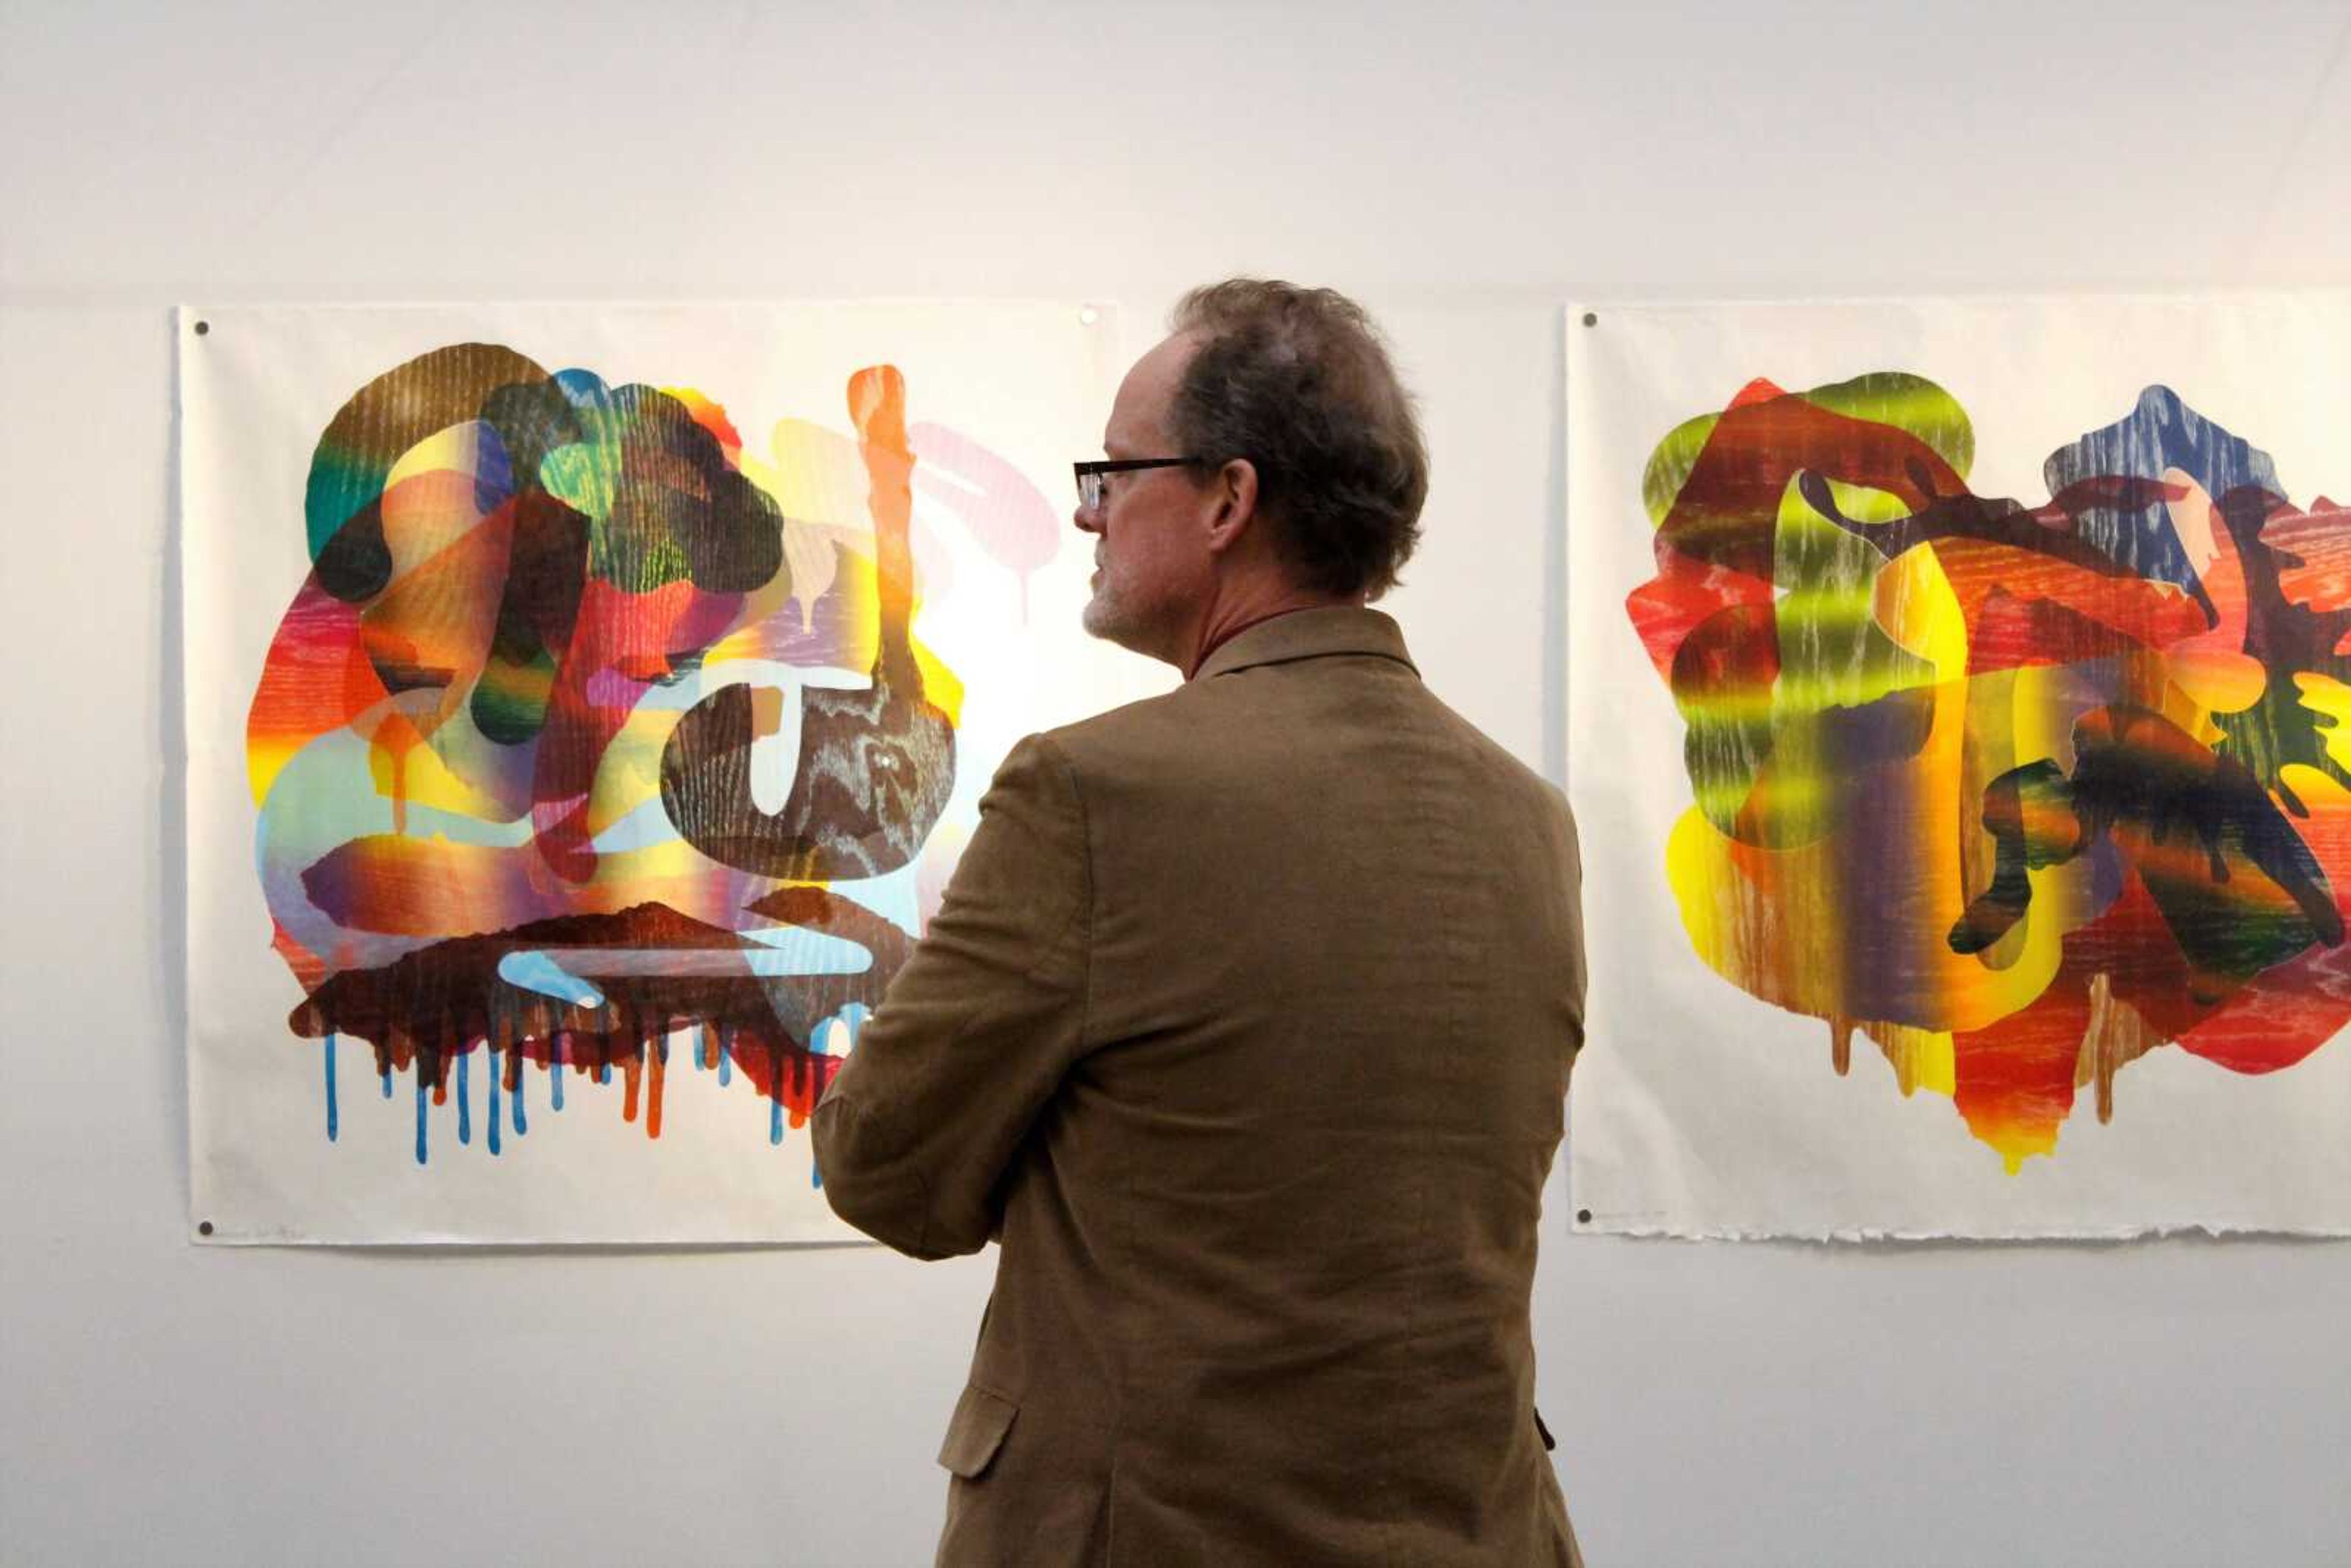 A patron observes an artwork piece displayed at River Campus during First Friday with the Arts on Nov. 3.